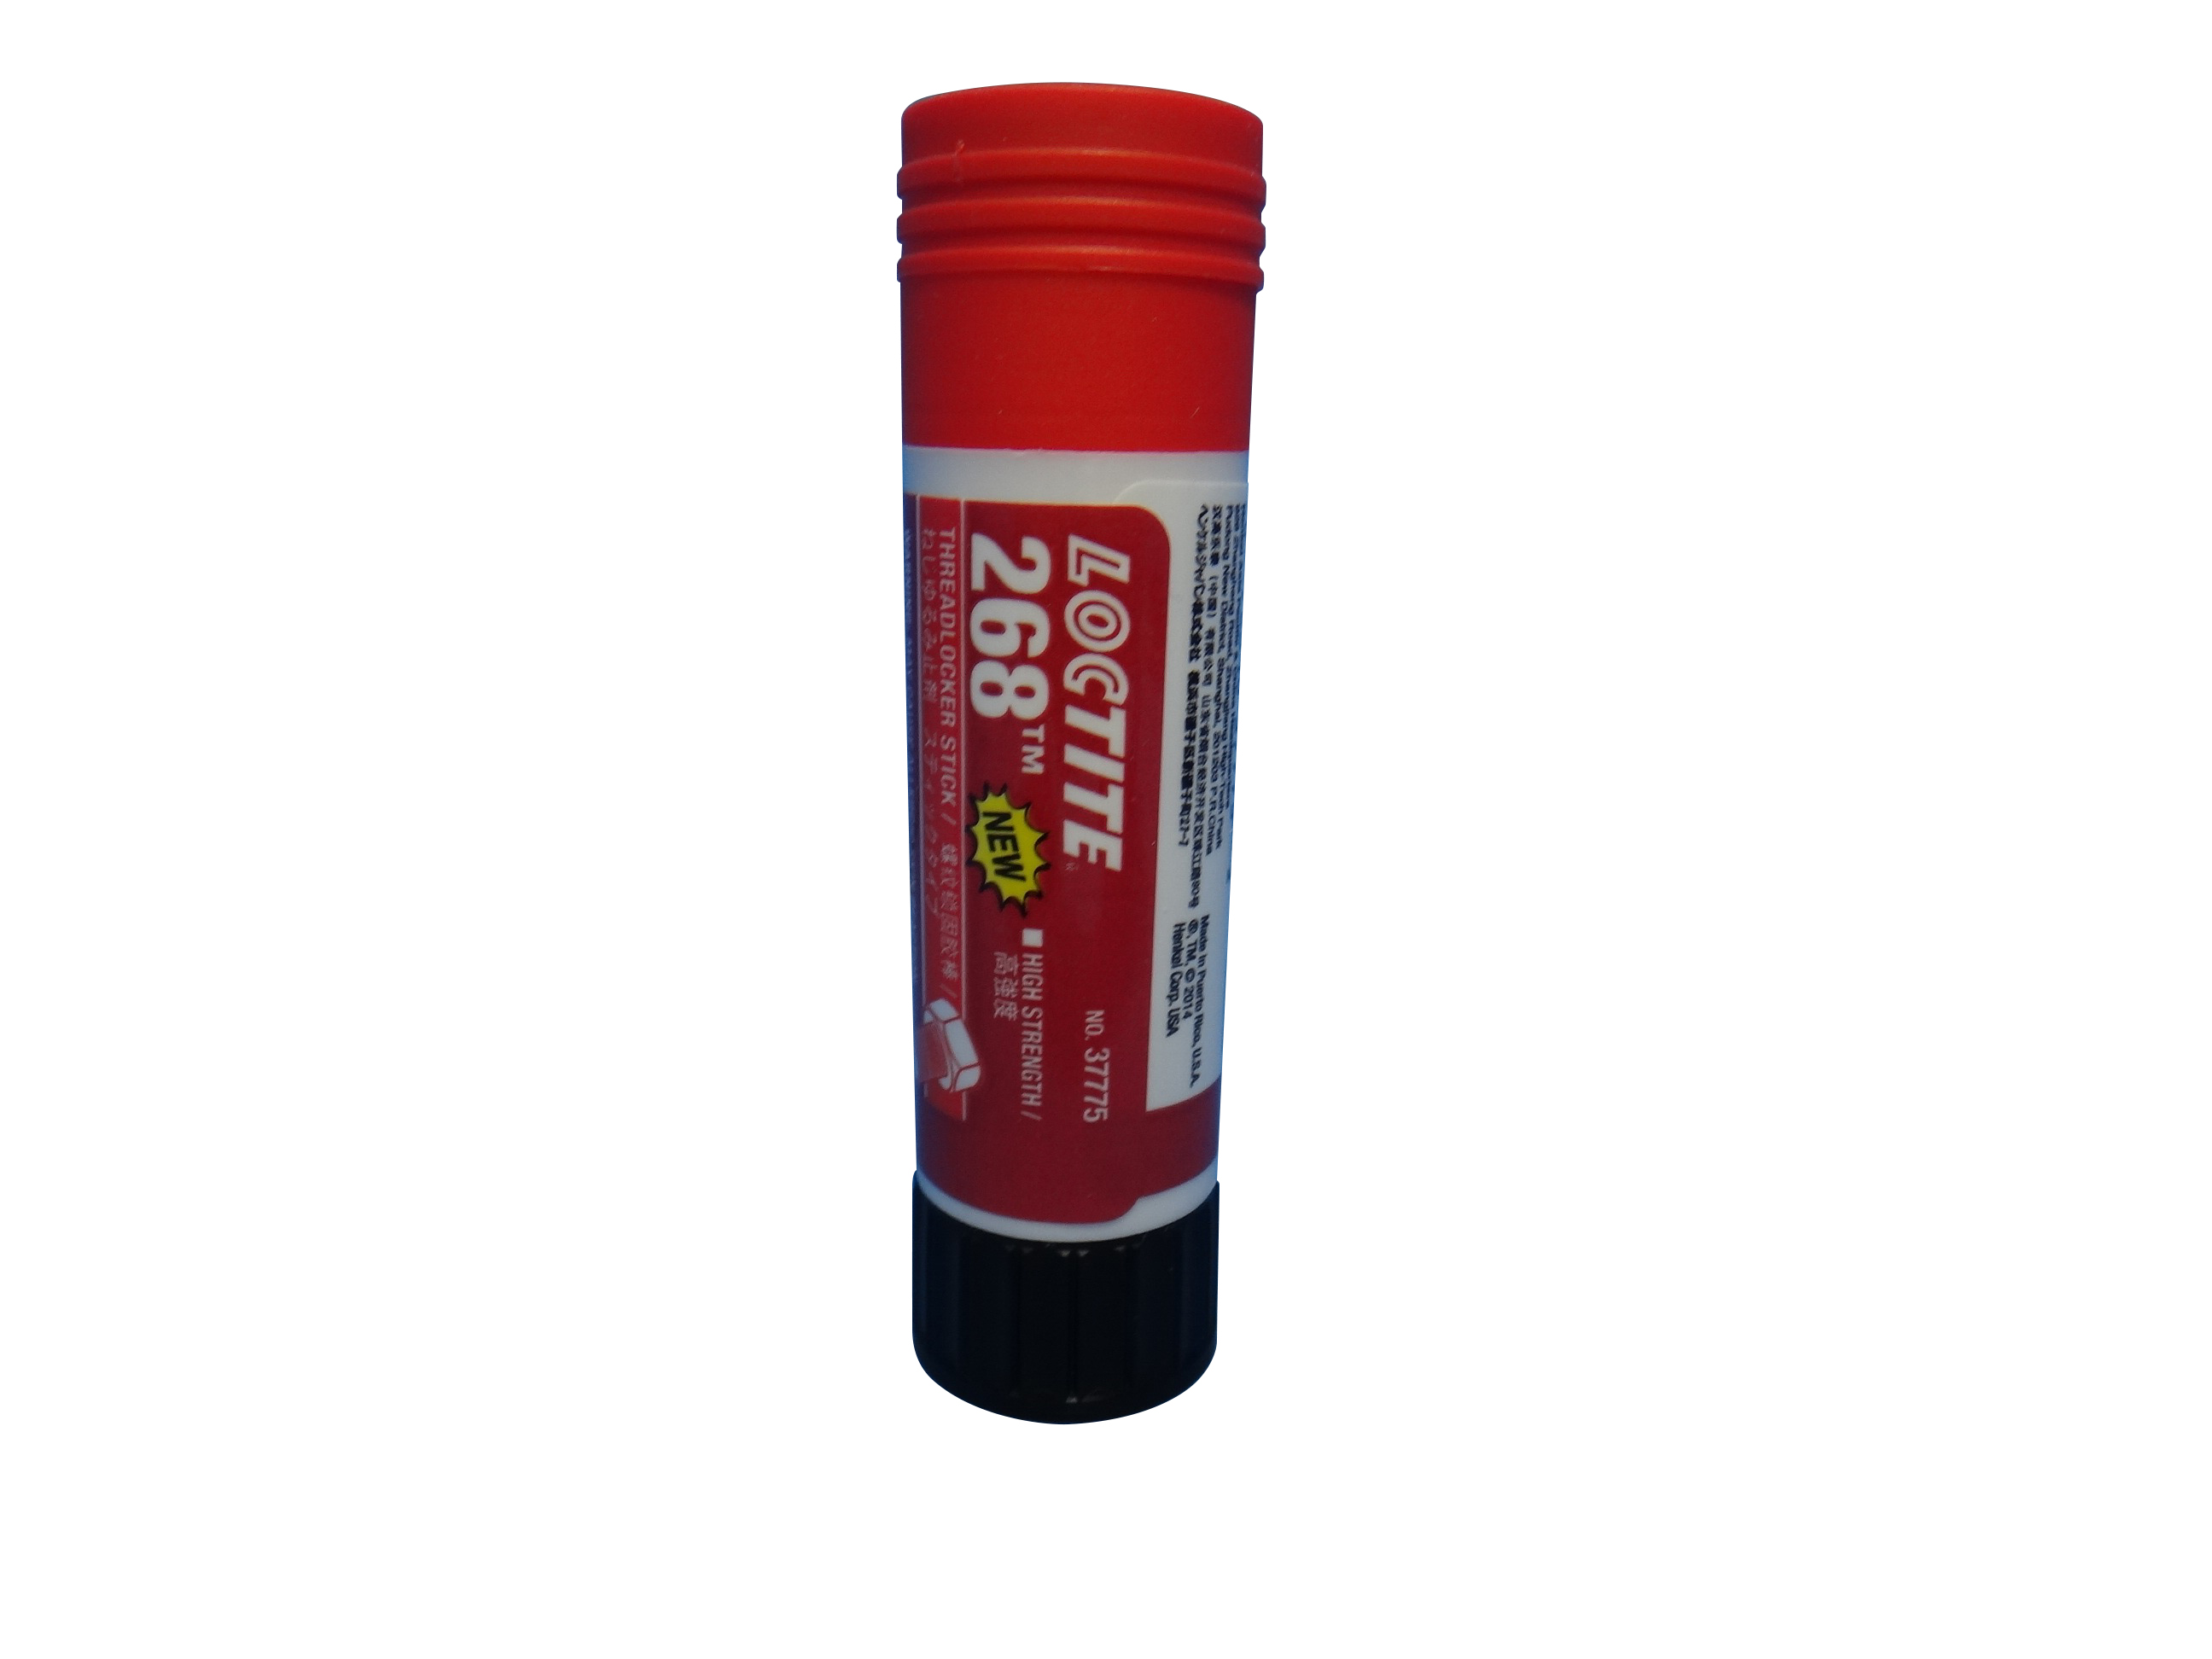 Loctite Anaerobic Adhesive for Thread Locking 268 (High Strength)